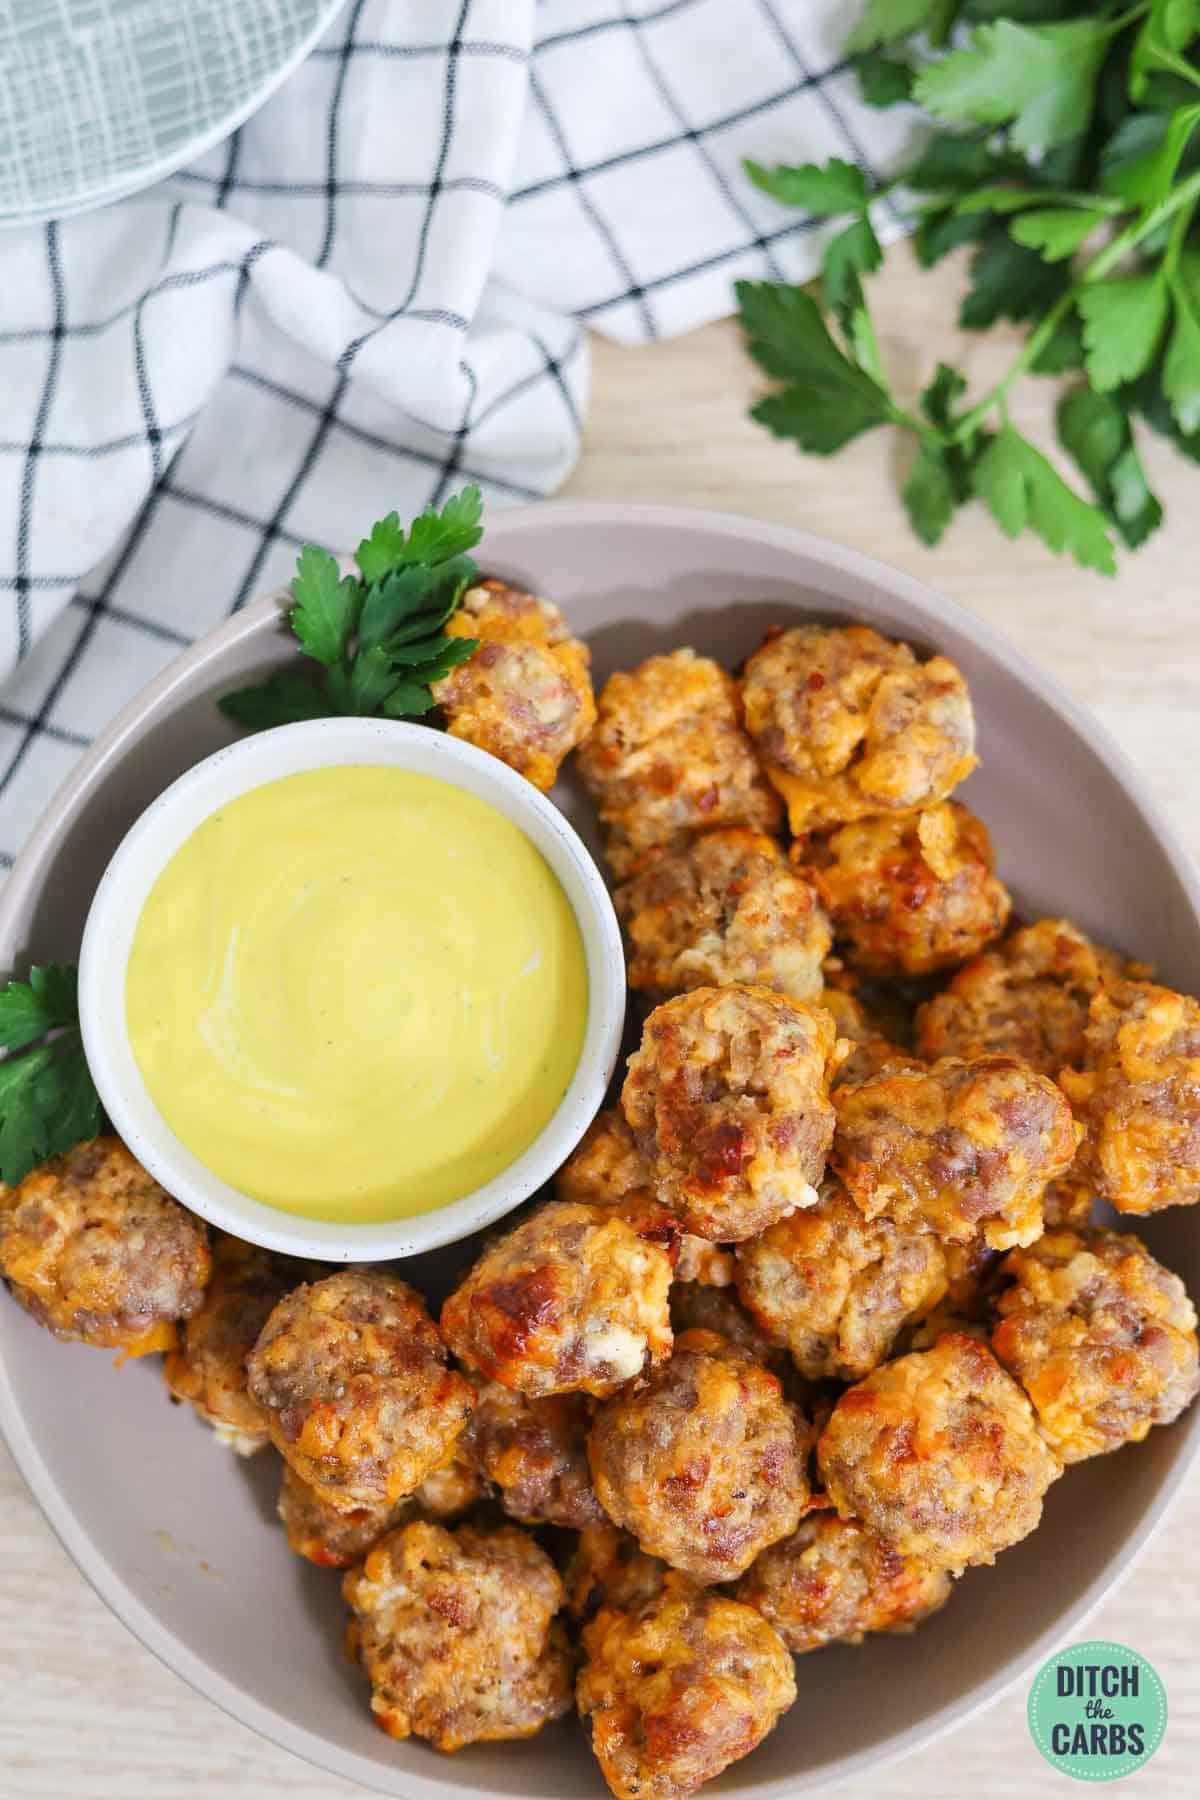 Keto sausage balls on a round serving plate with a side of mustard.